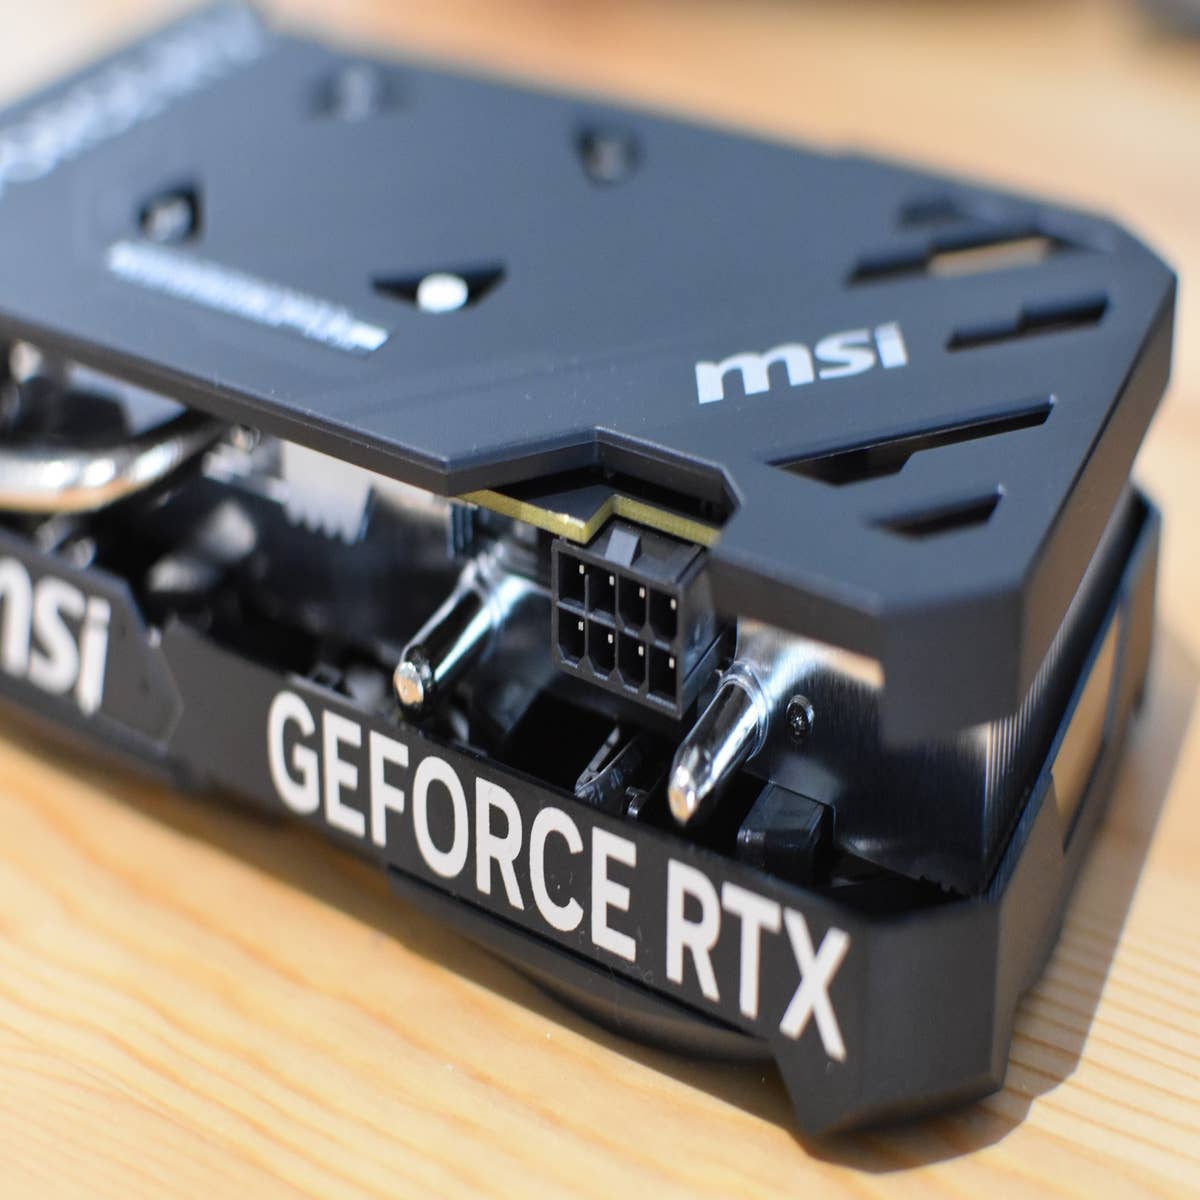 Nvidia GeForce RTX 4060 Review: Truly Mainstream at $299